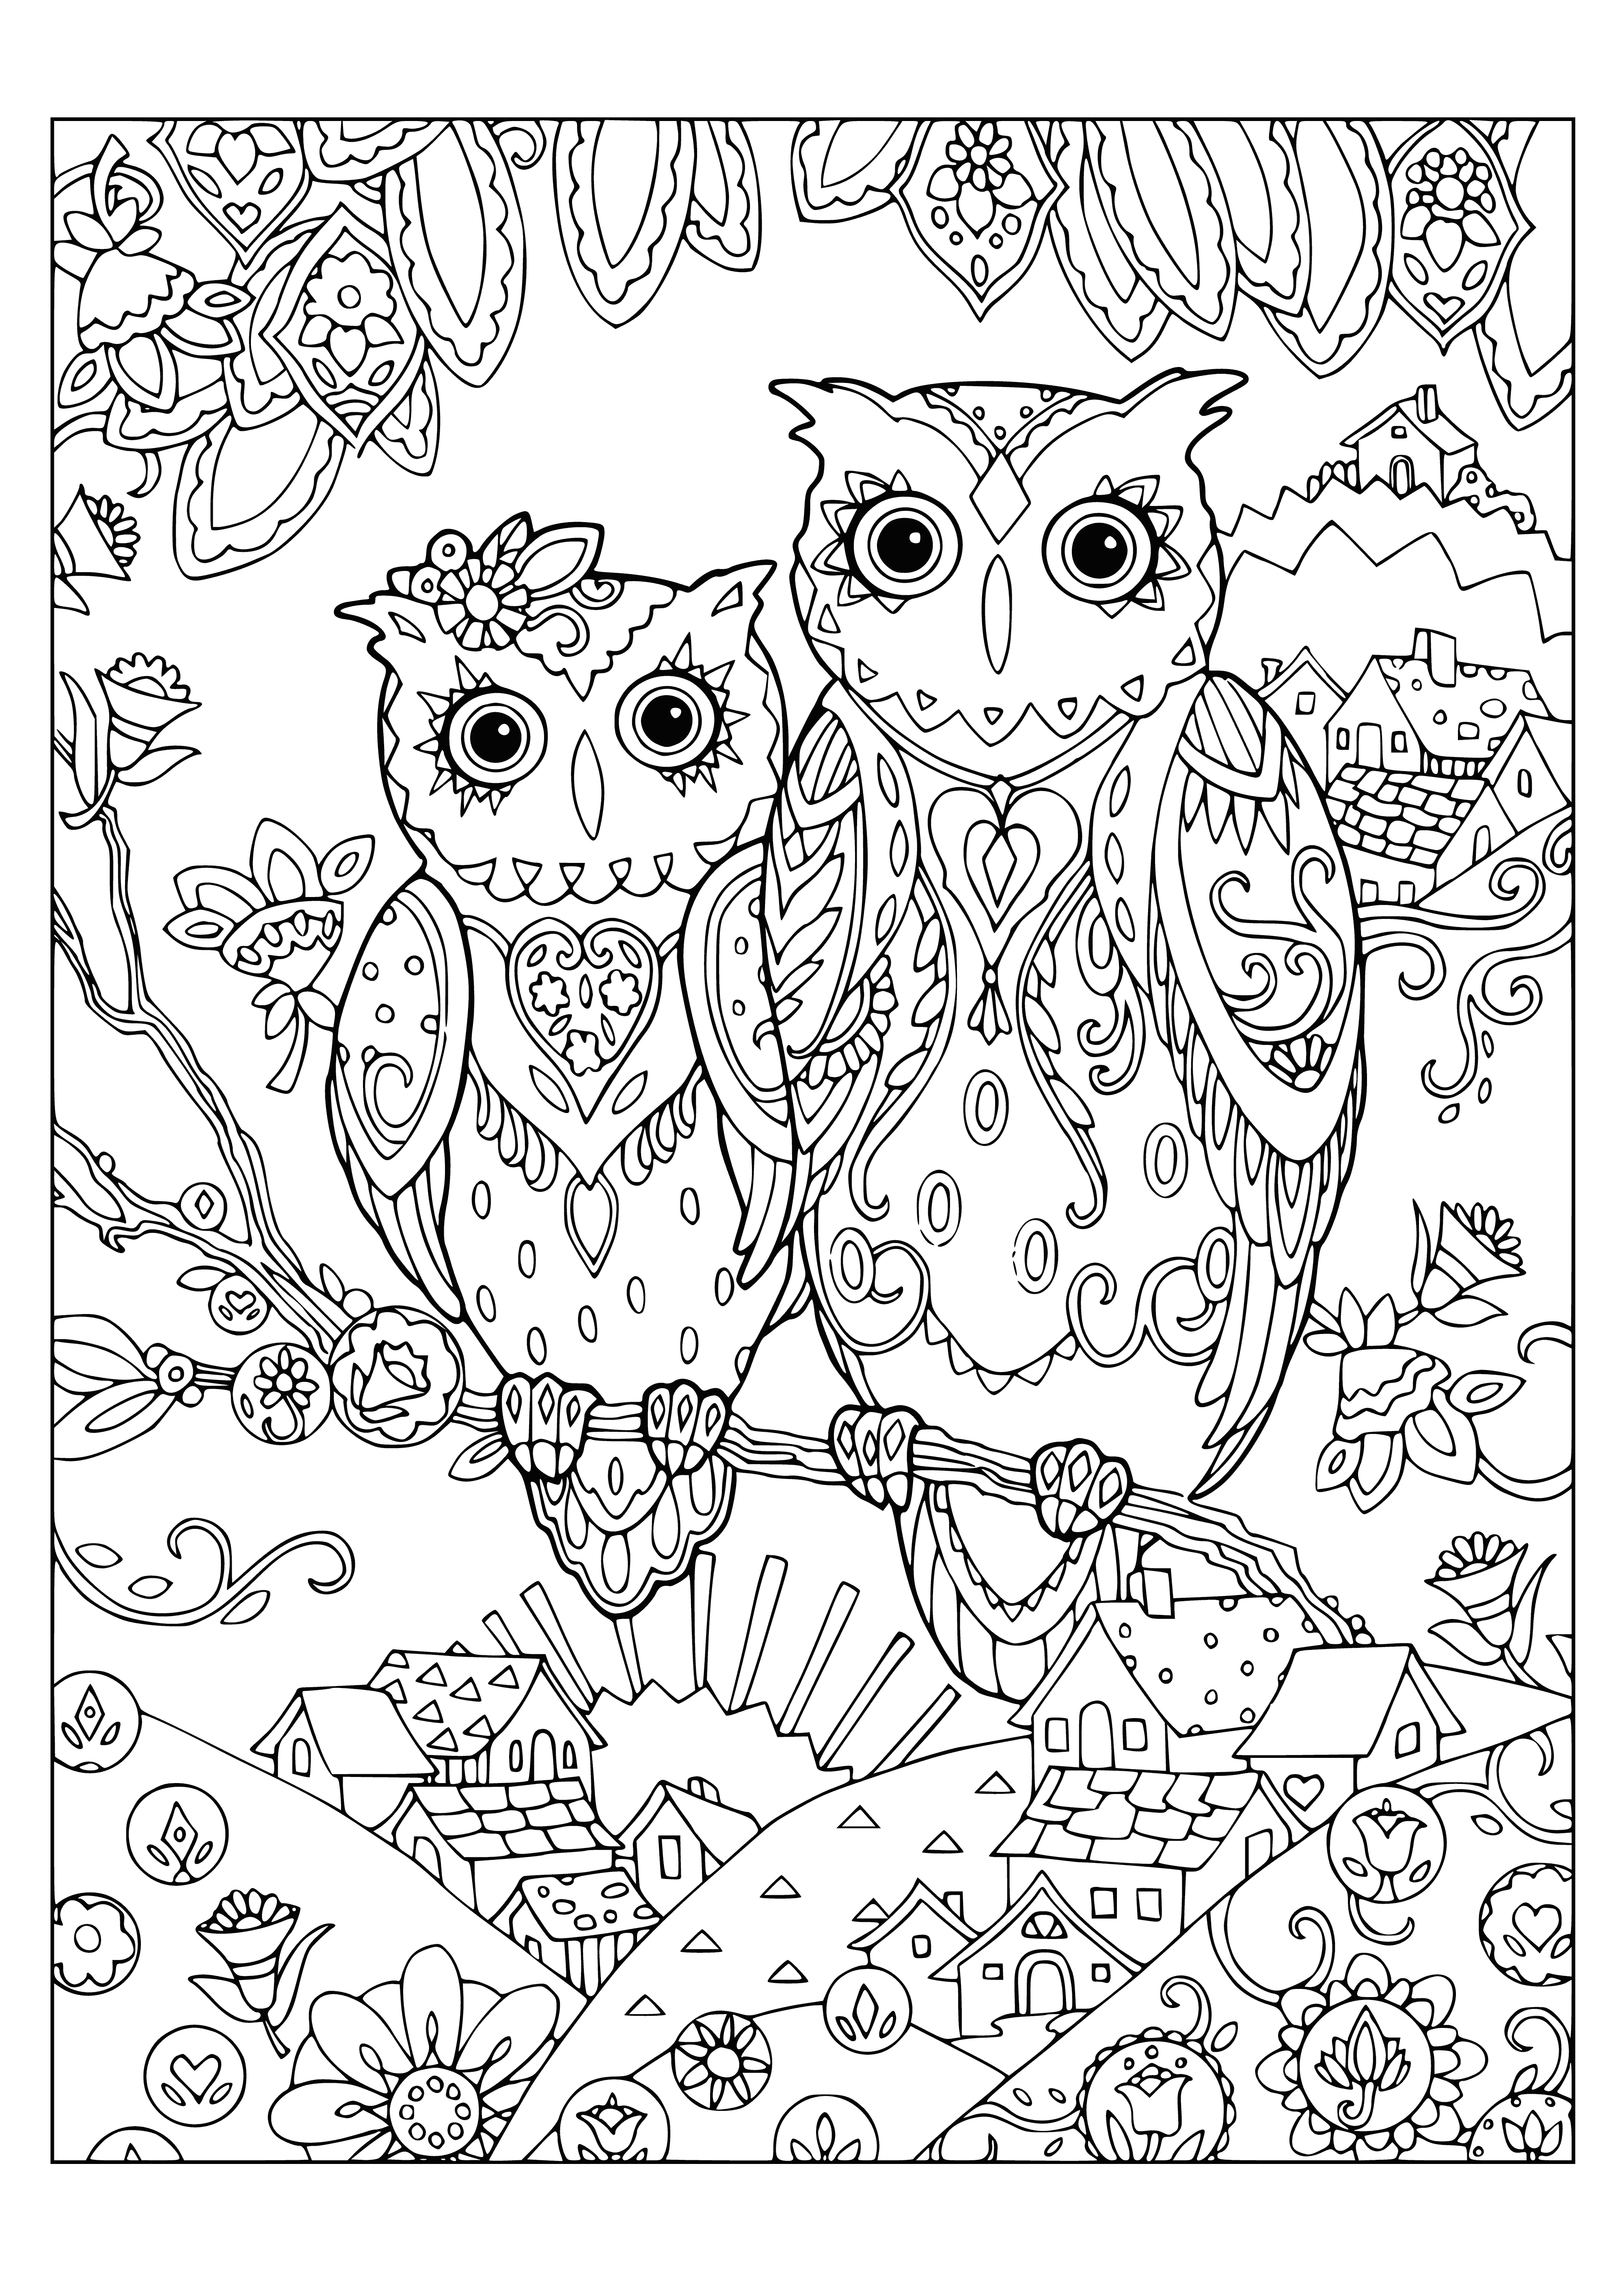 coloring page: A big owl in the center, surrounded by smaller colorful owls, with trees & flowers in the background: a peaceful coloring page to color & enjoy!